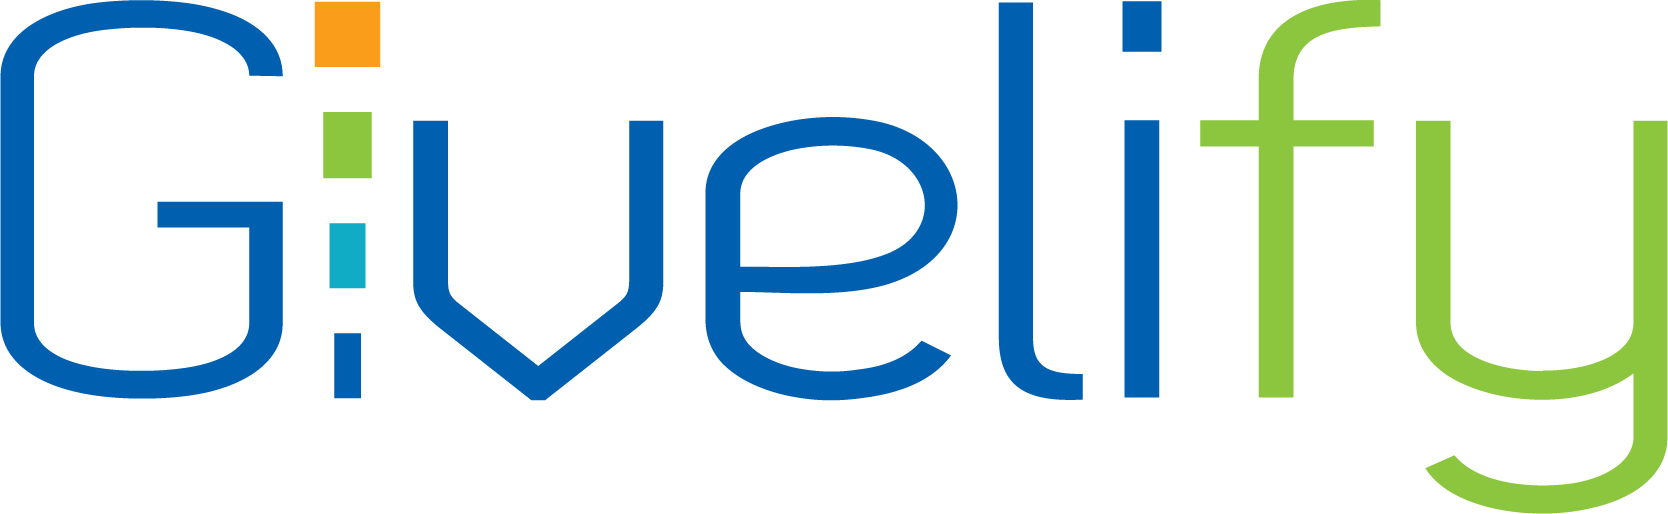 Givelify_Logo_Color